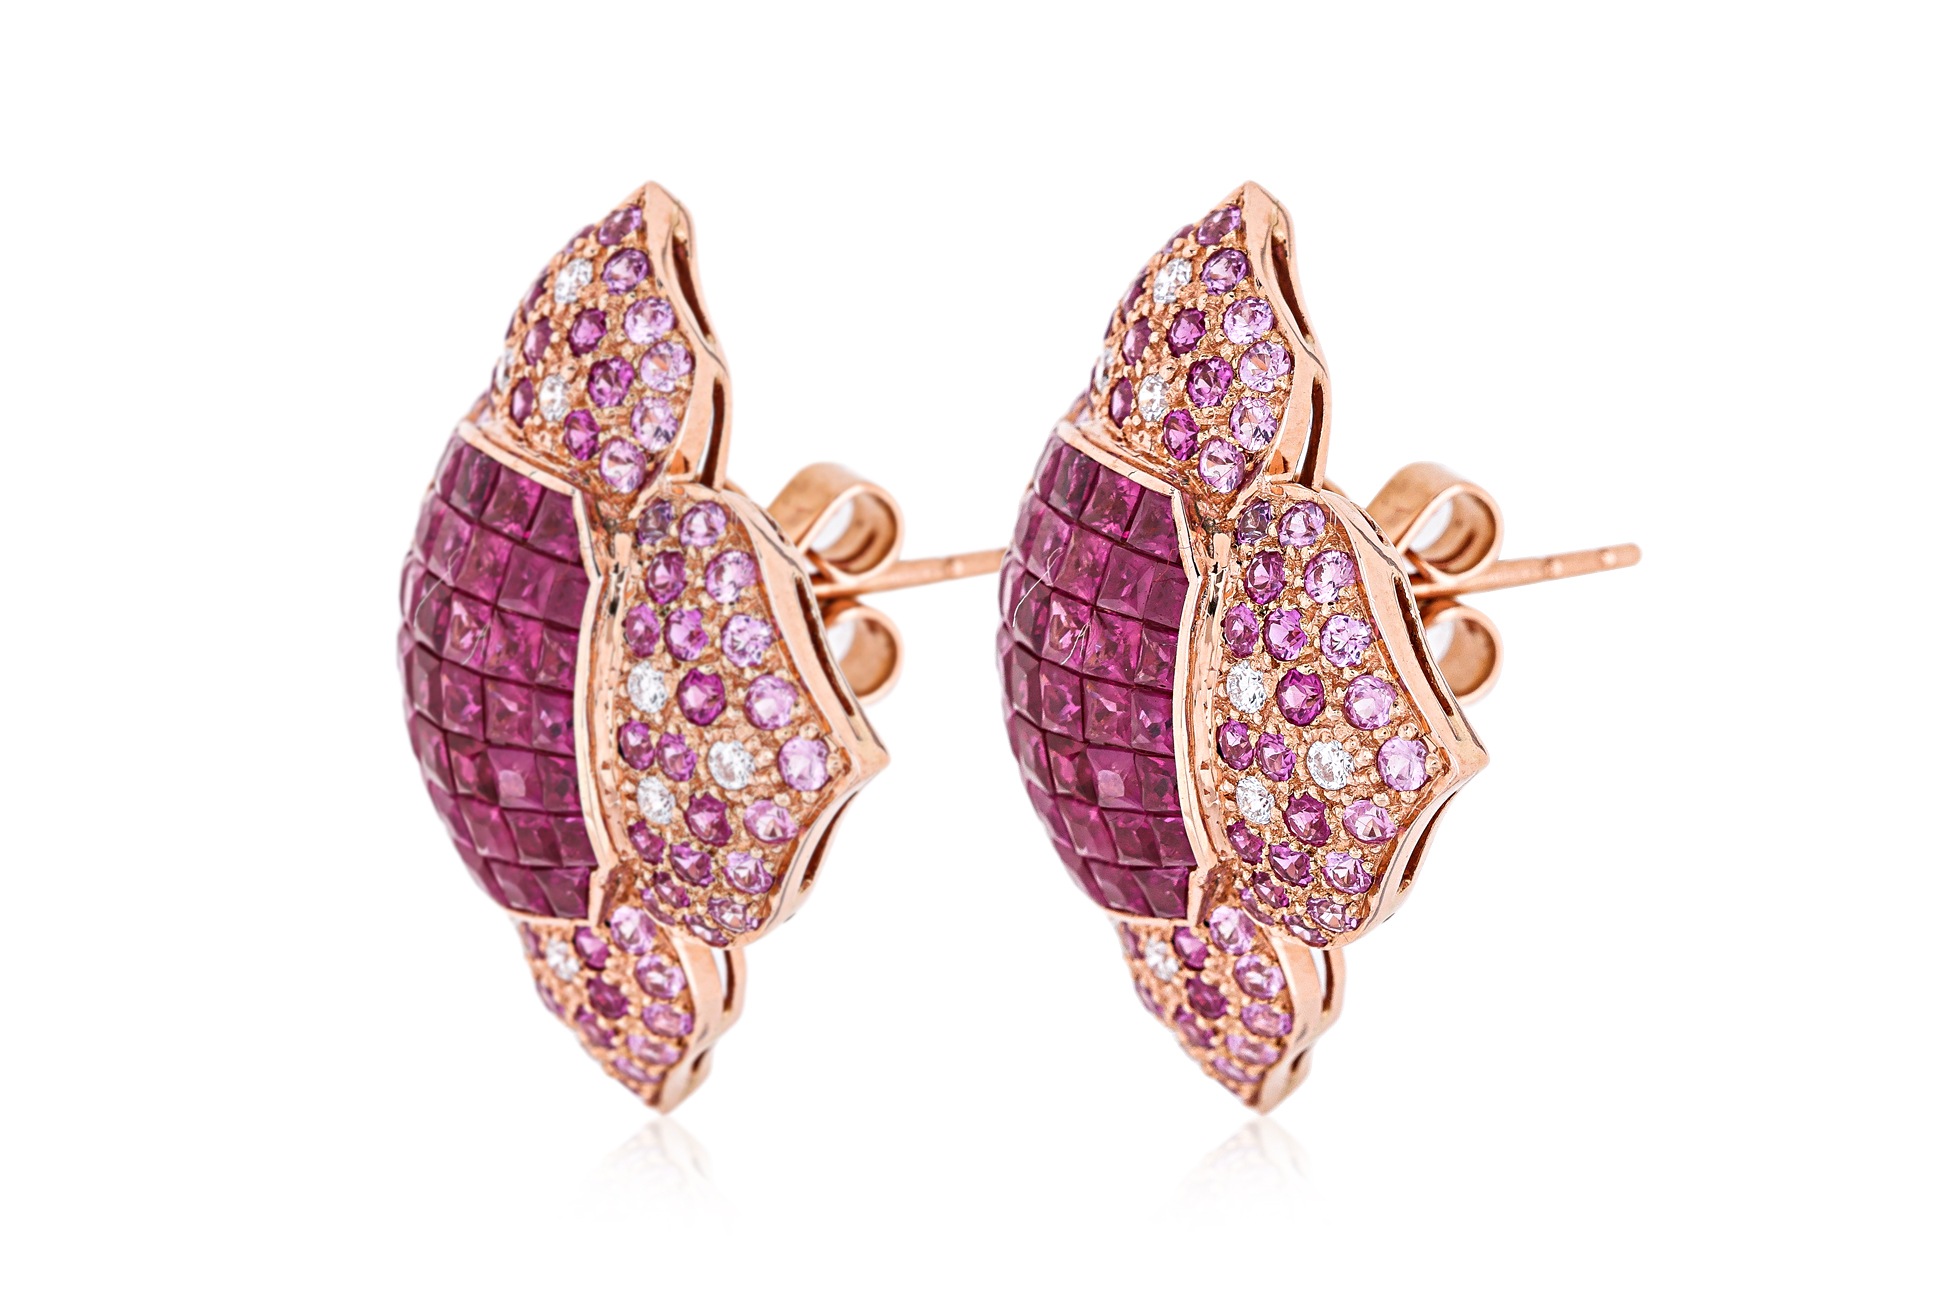 A PAIR OF MYSTERY SET PINK SAPPHIRE AND DIAMOND EARRINGS - Image 2 of 3